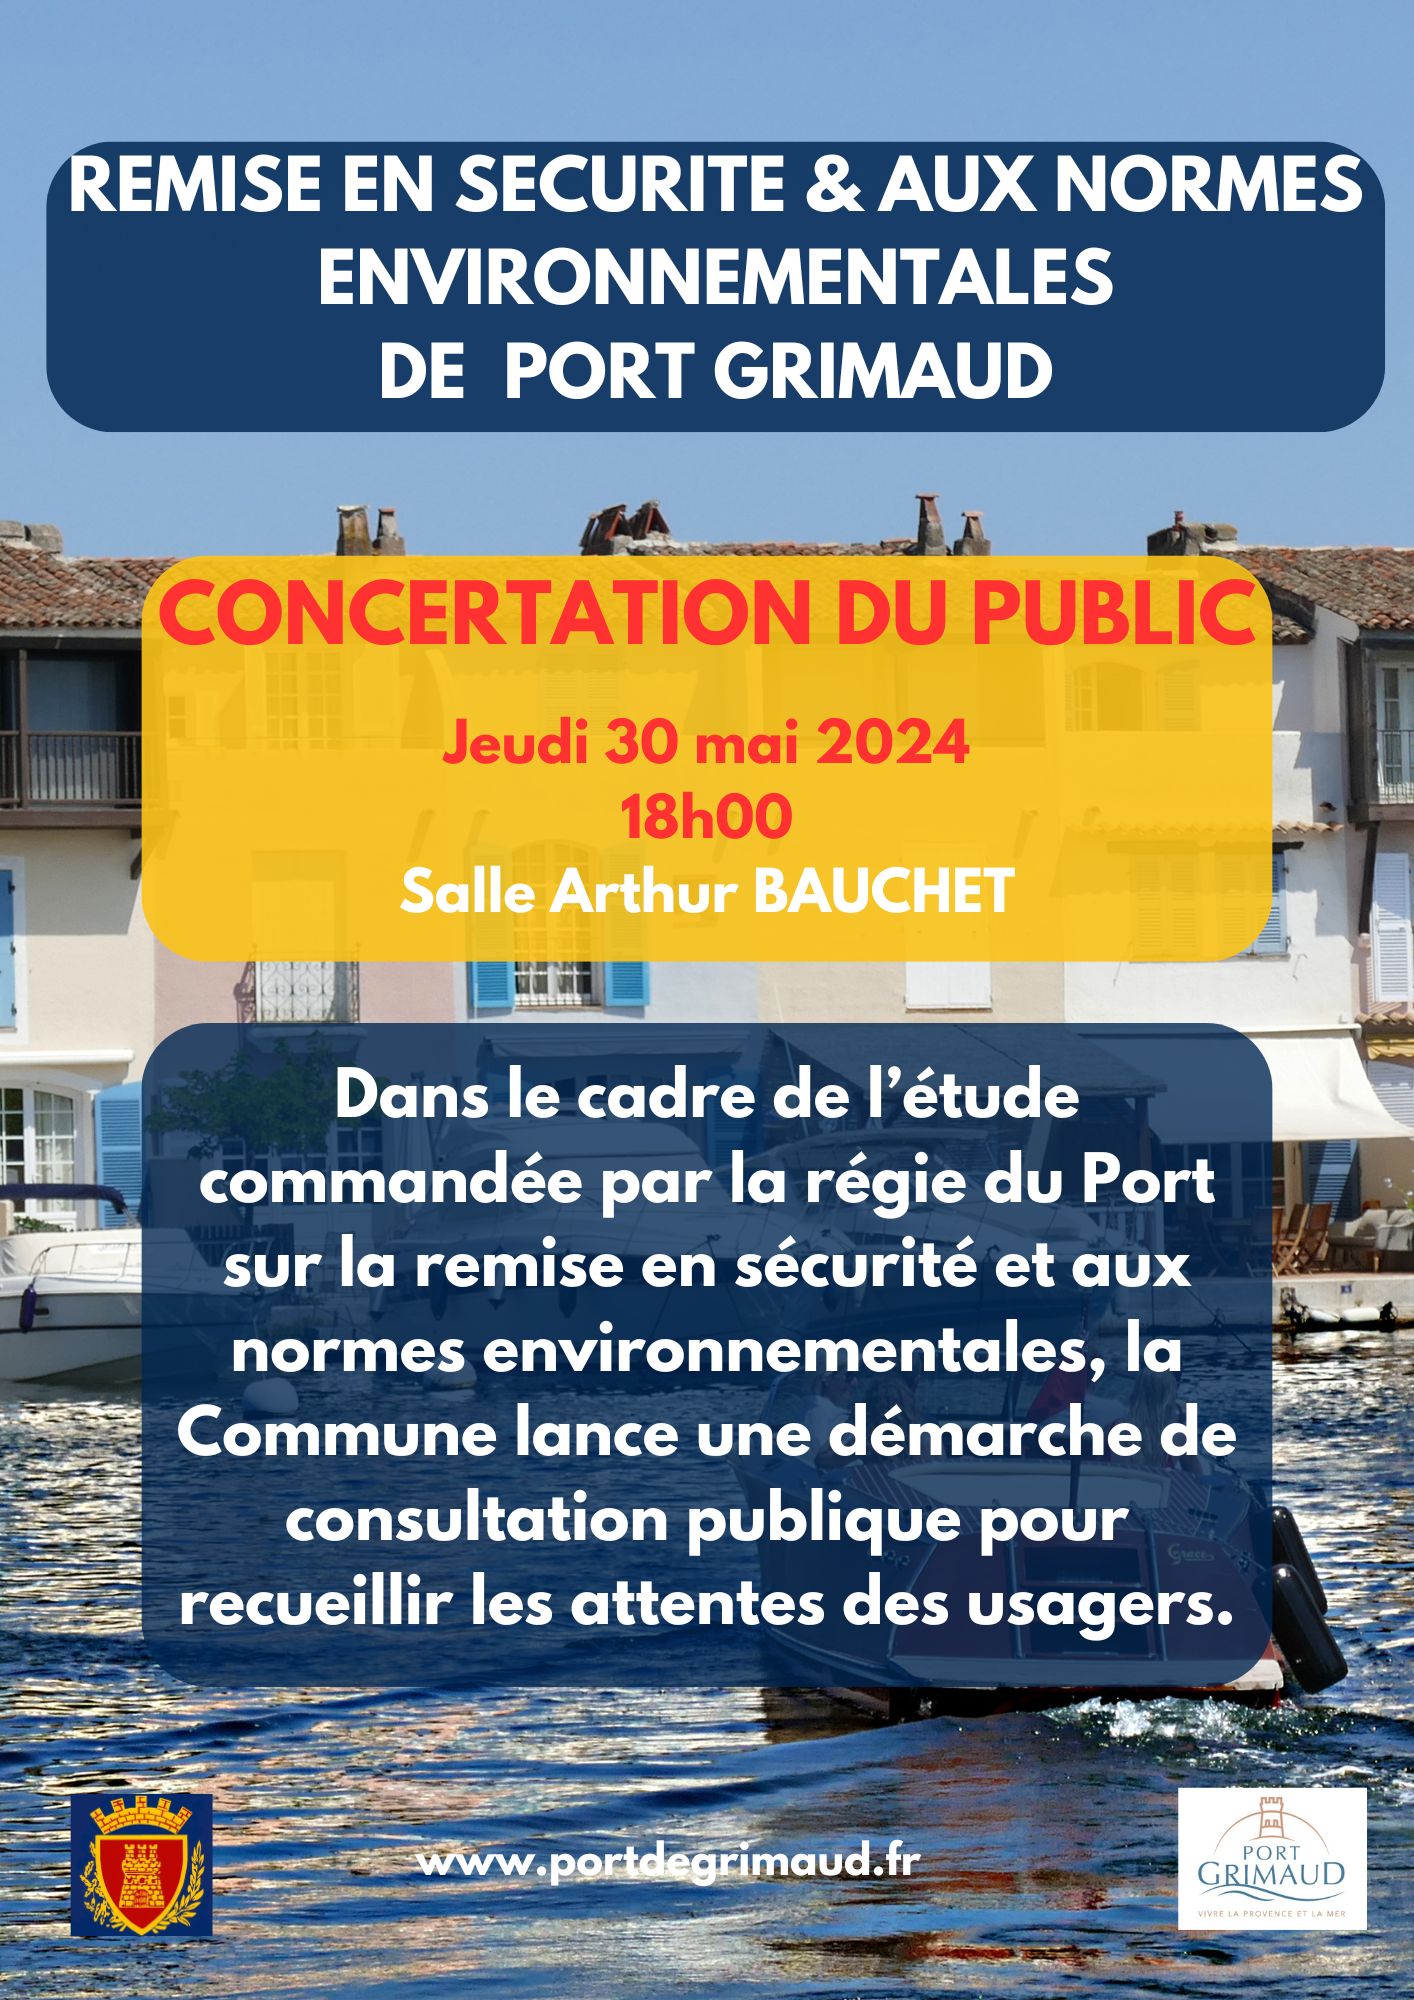 Thursday May 30, 2024 - Public consultation on restoring security to the Port